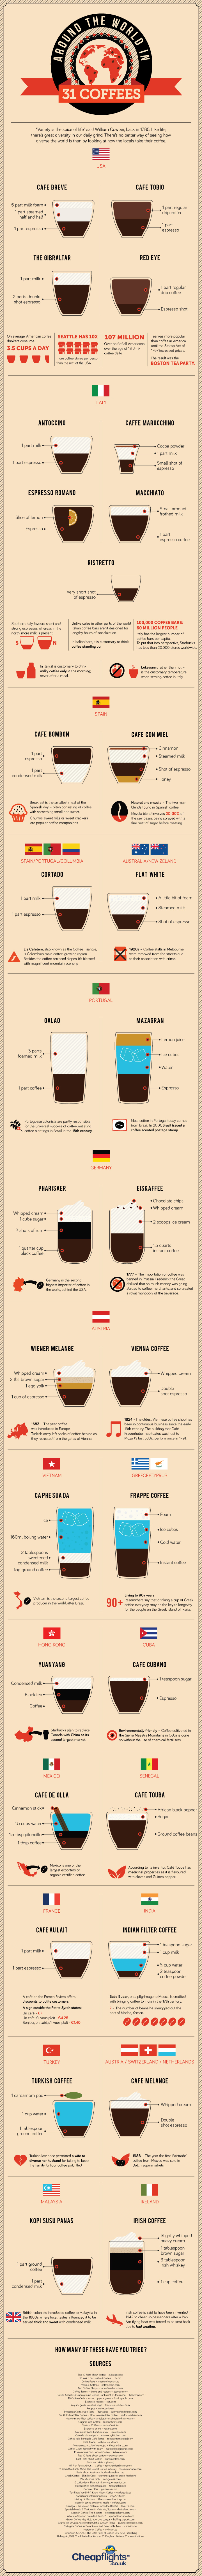 Around the World in 31 Coffees